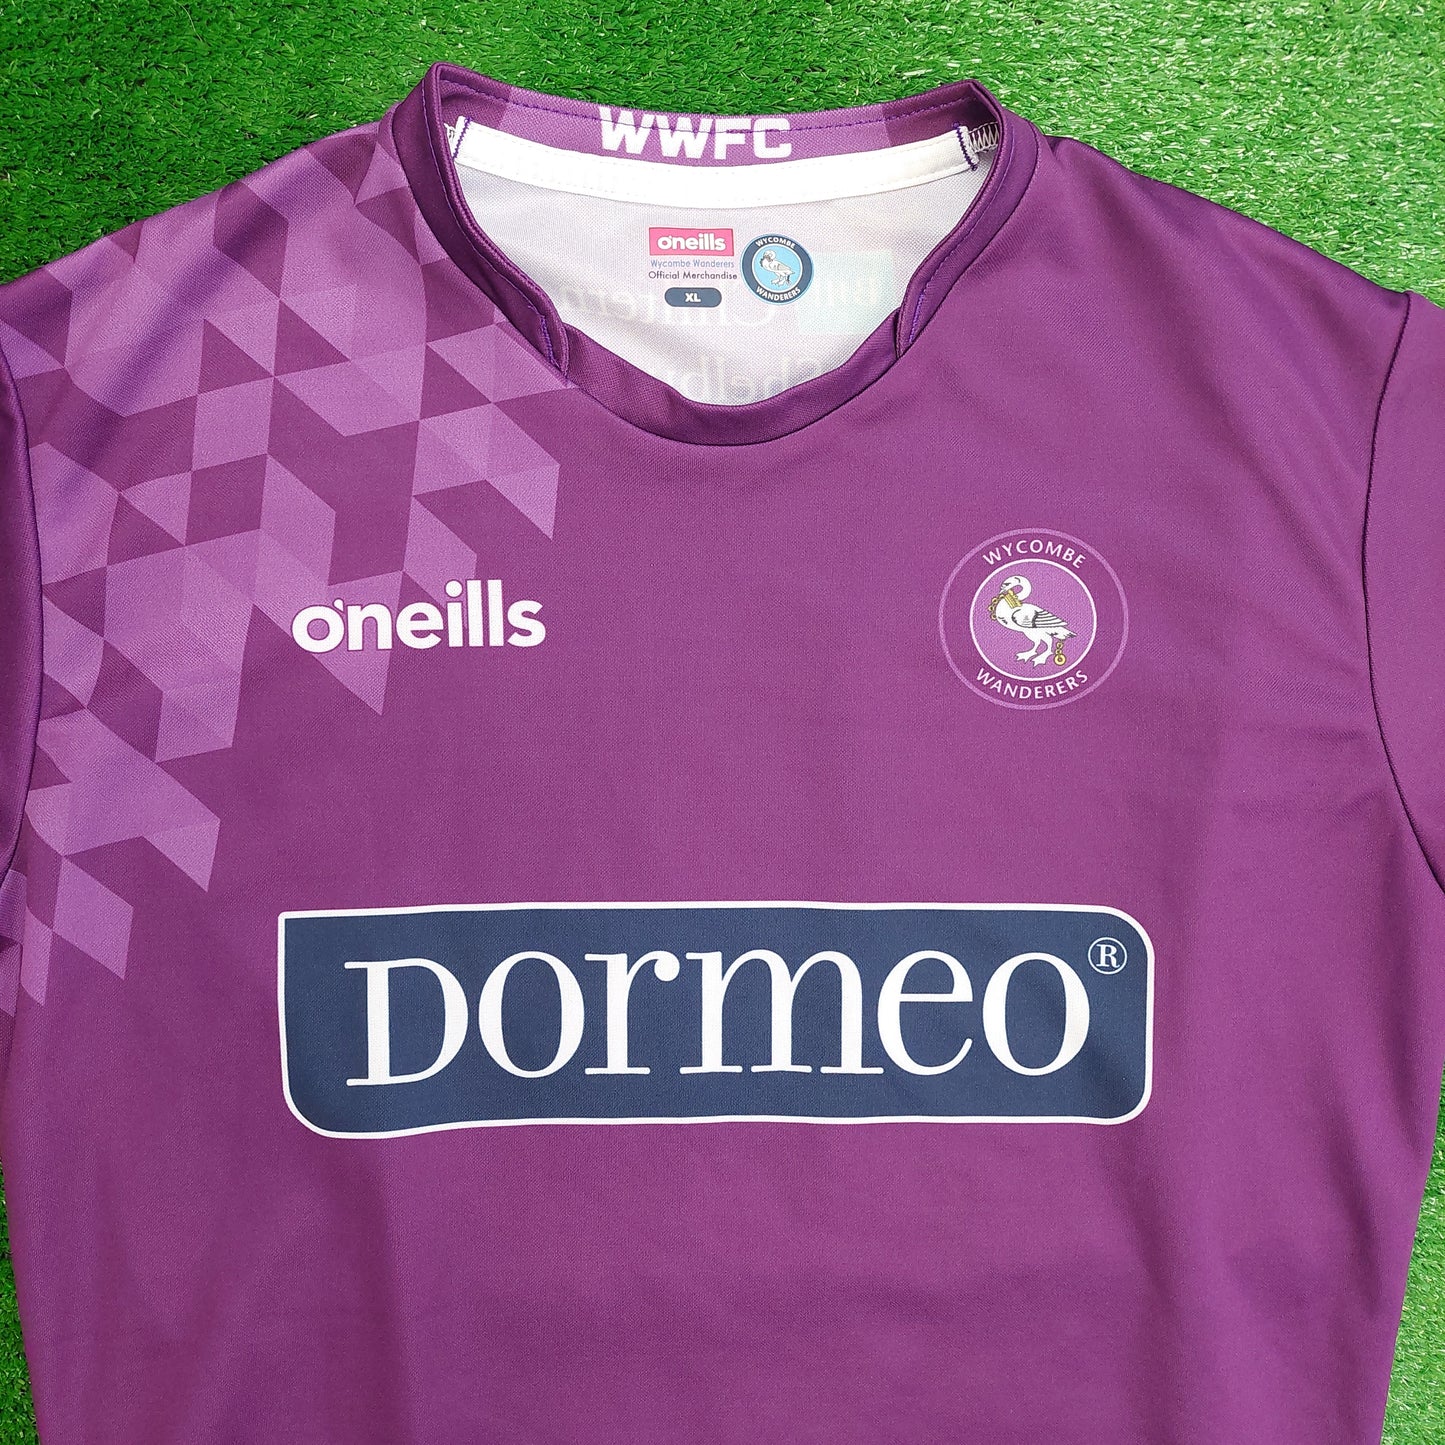 Wycombe Wanderers 2019/20 GK Shirt (Excellent) - Size XL